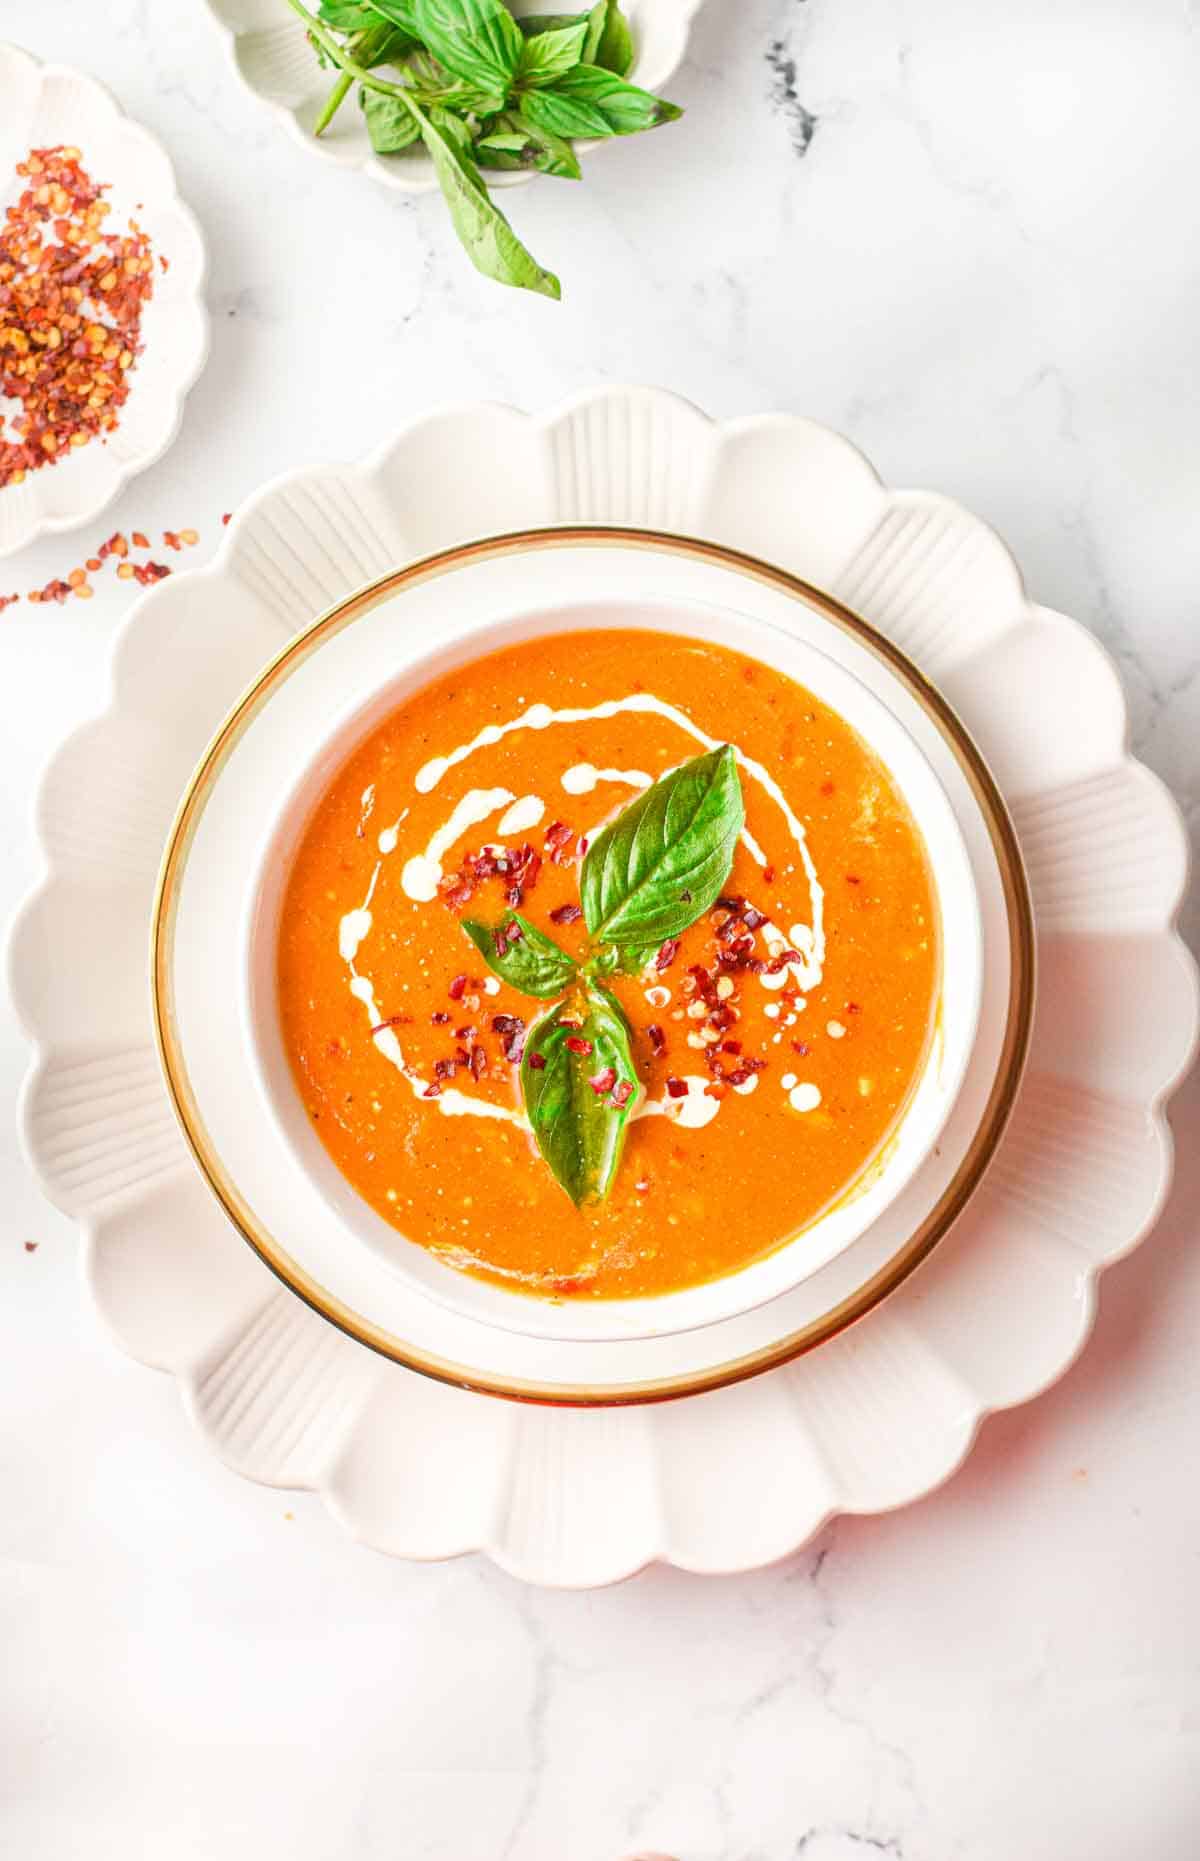 creamy tomato soup garnished with a drizzle of cream, basil leaves, and chili flakes in a bowl on top of a sauce with a fluted edge